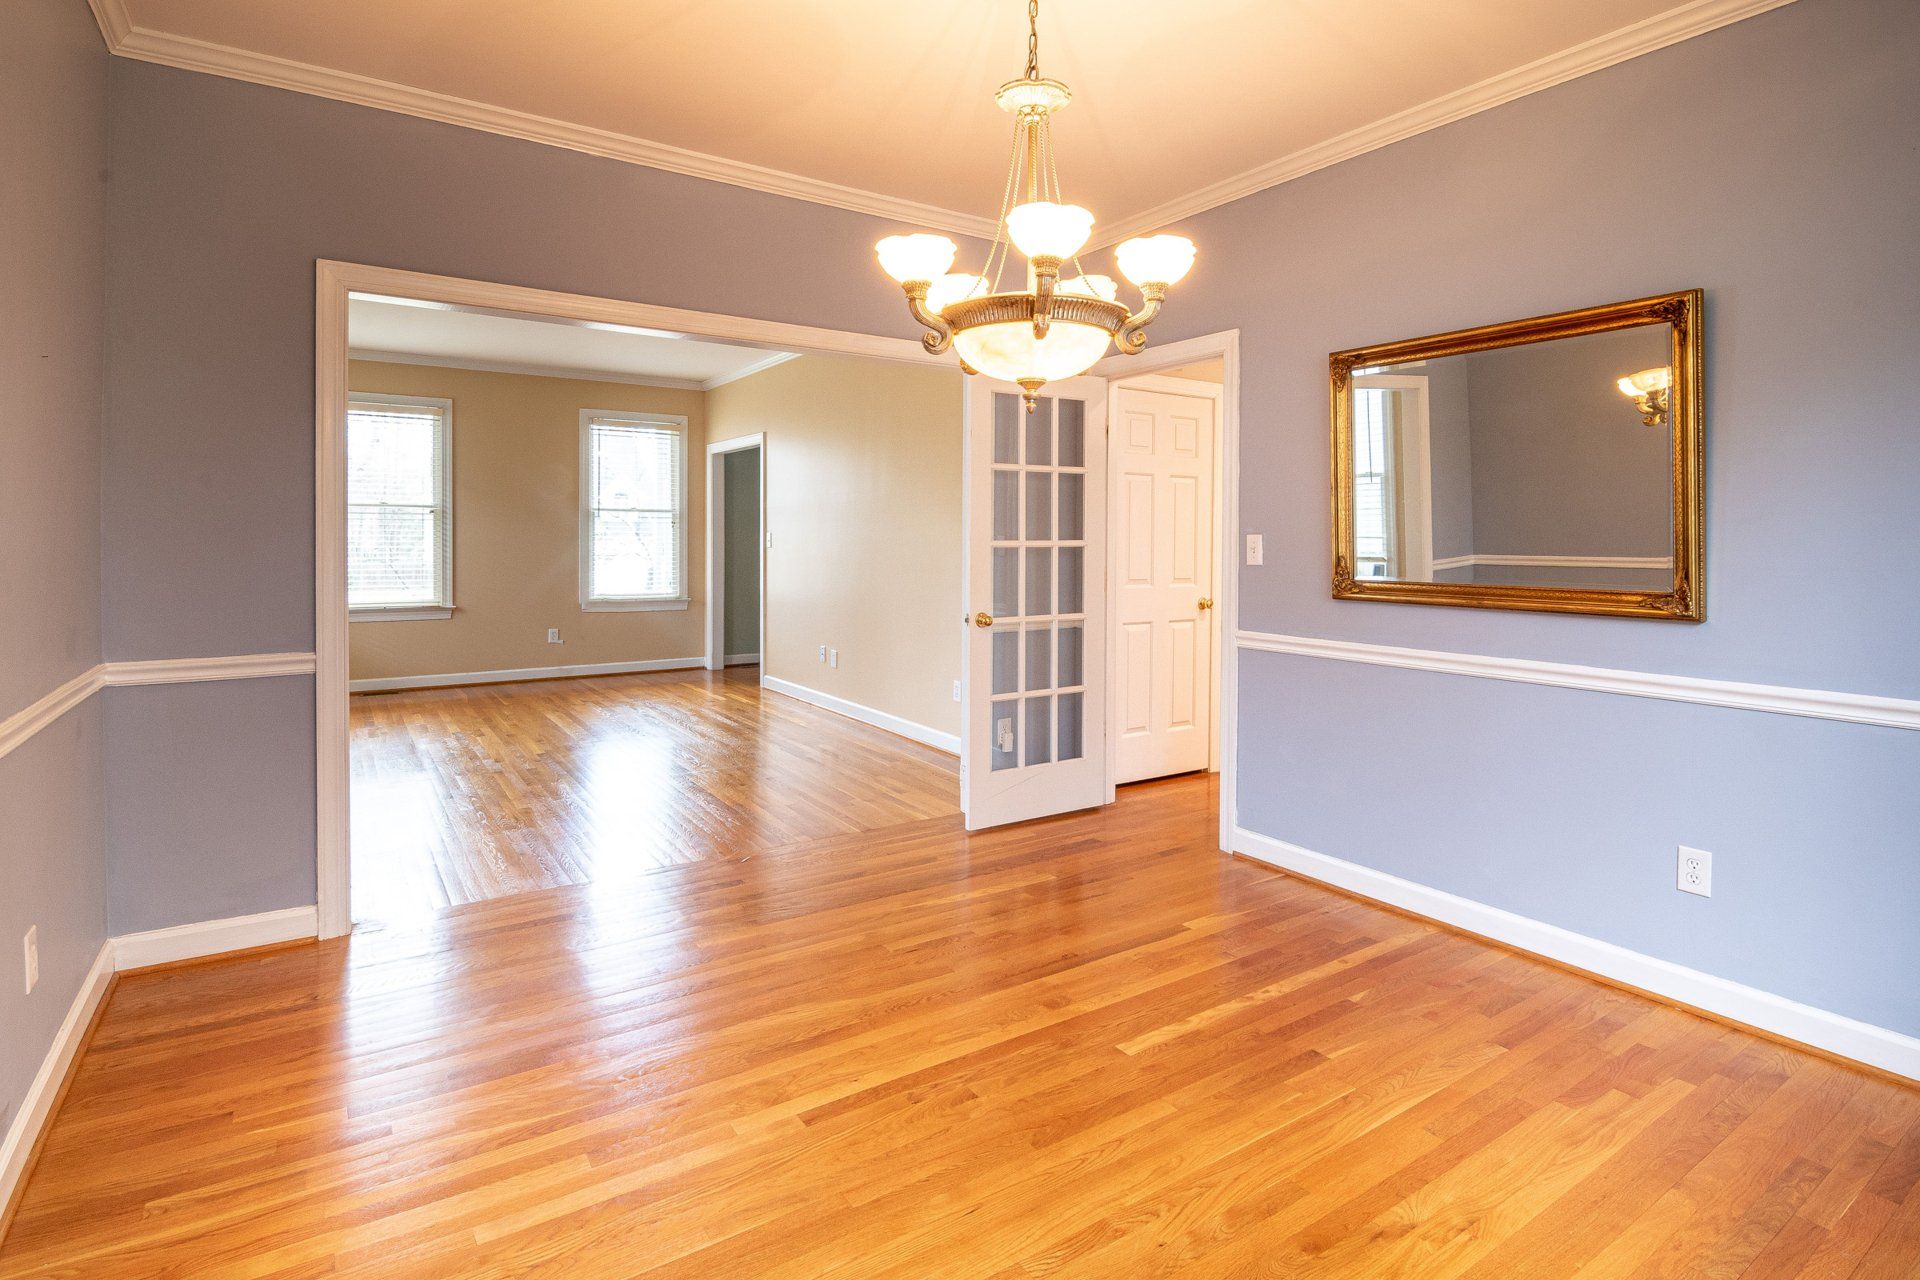 Acton, MA home with refinished hardwood floors